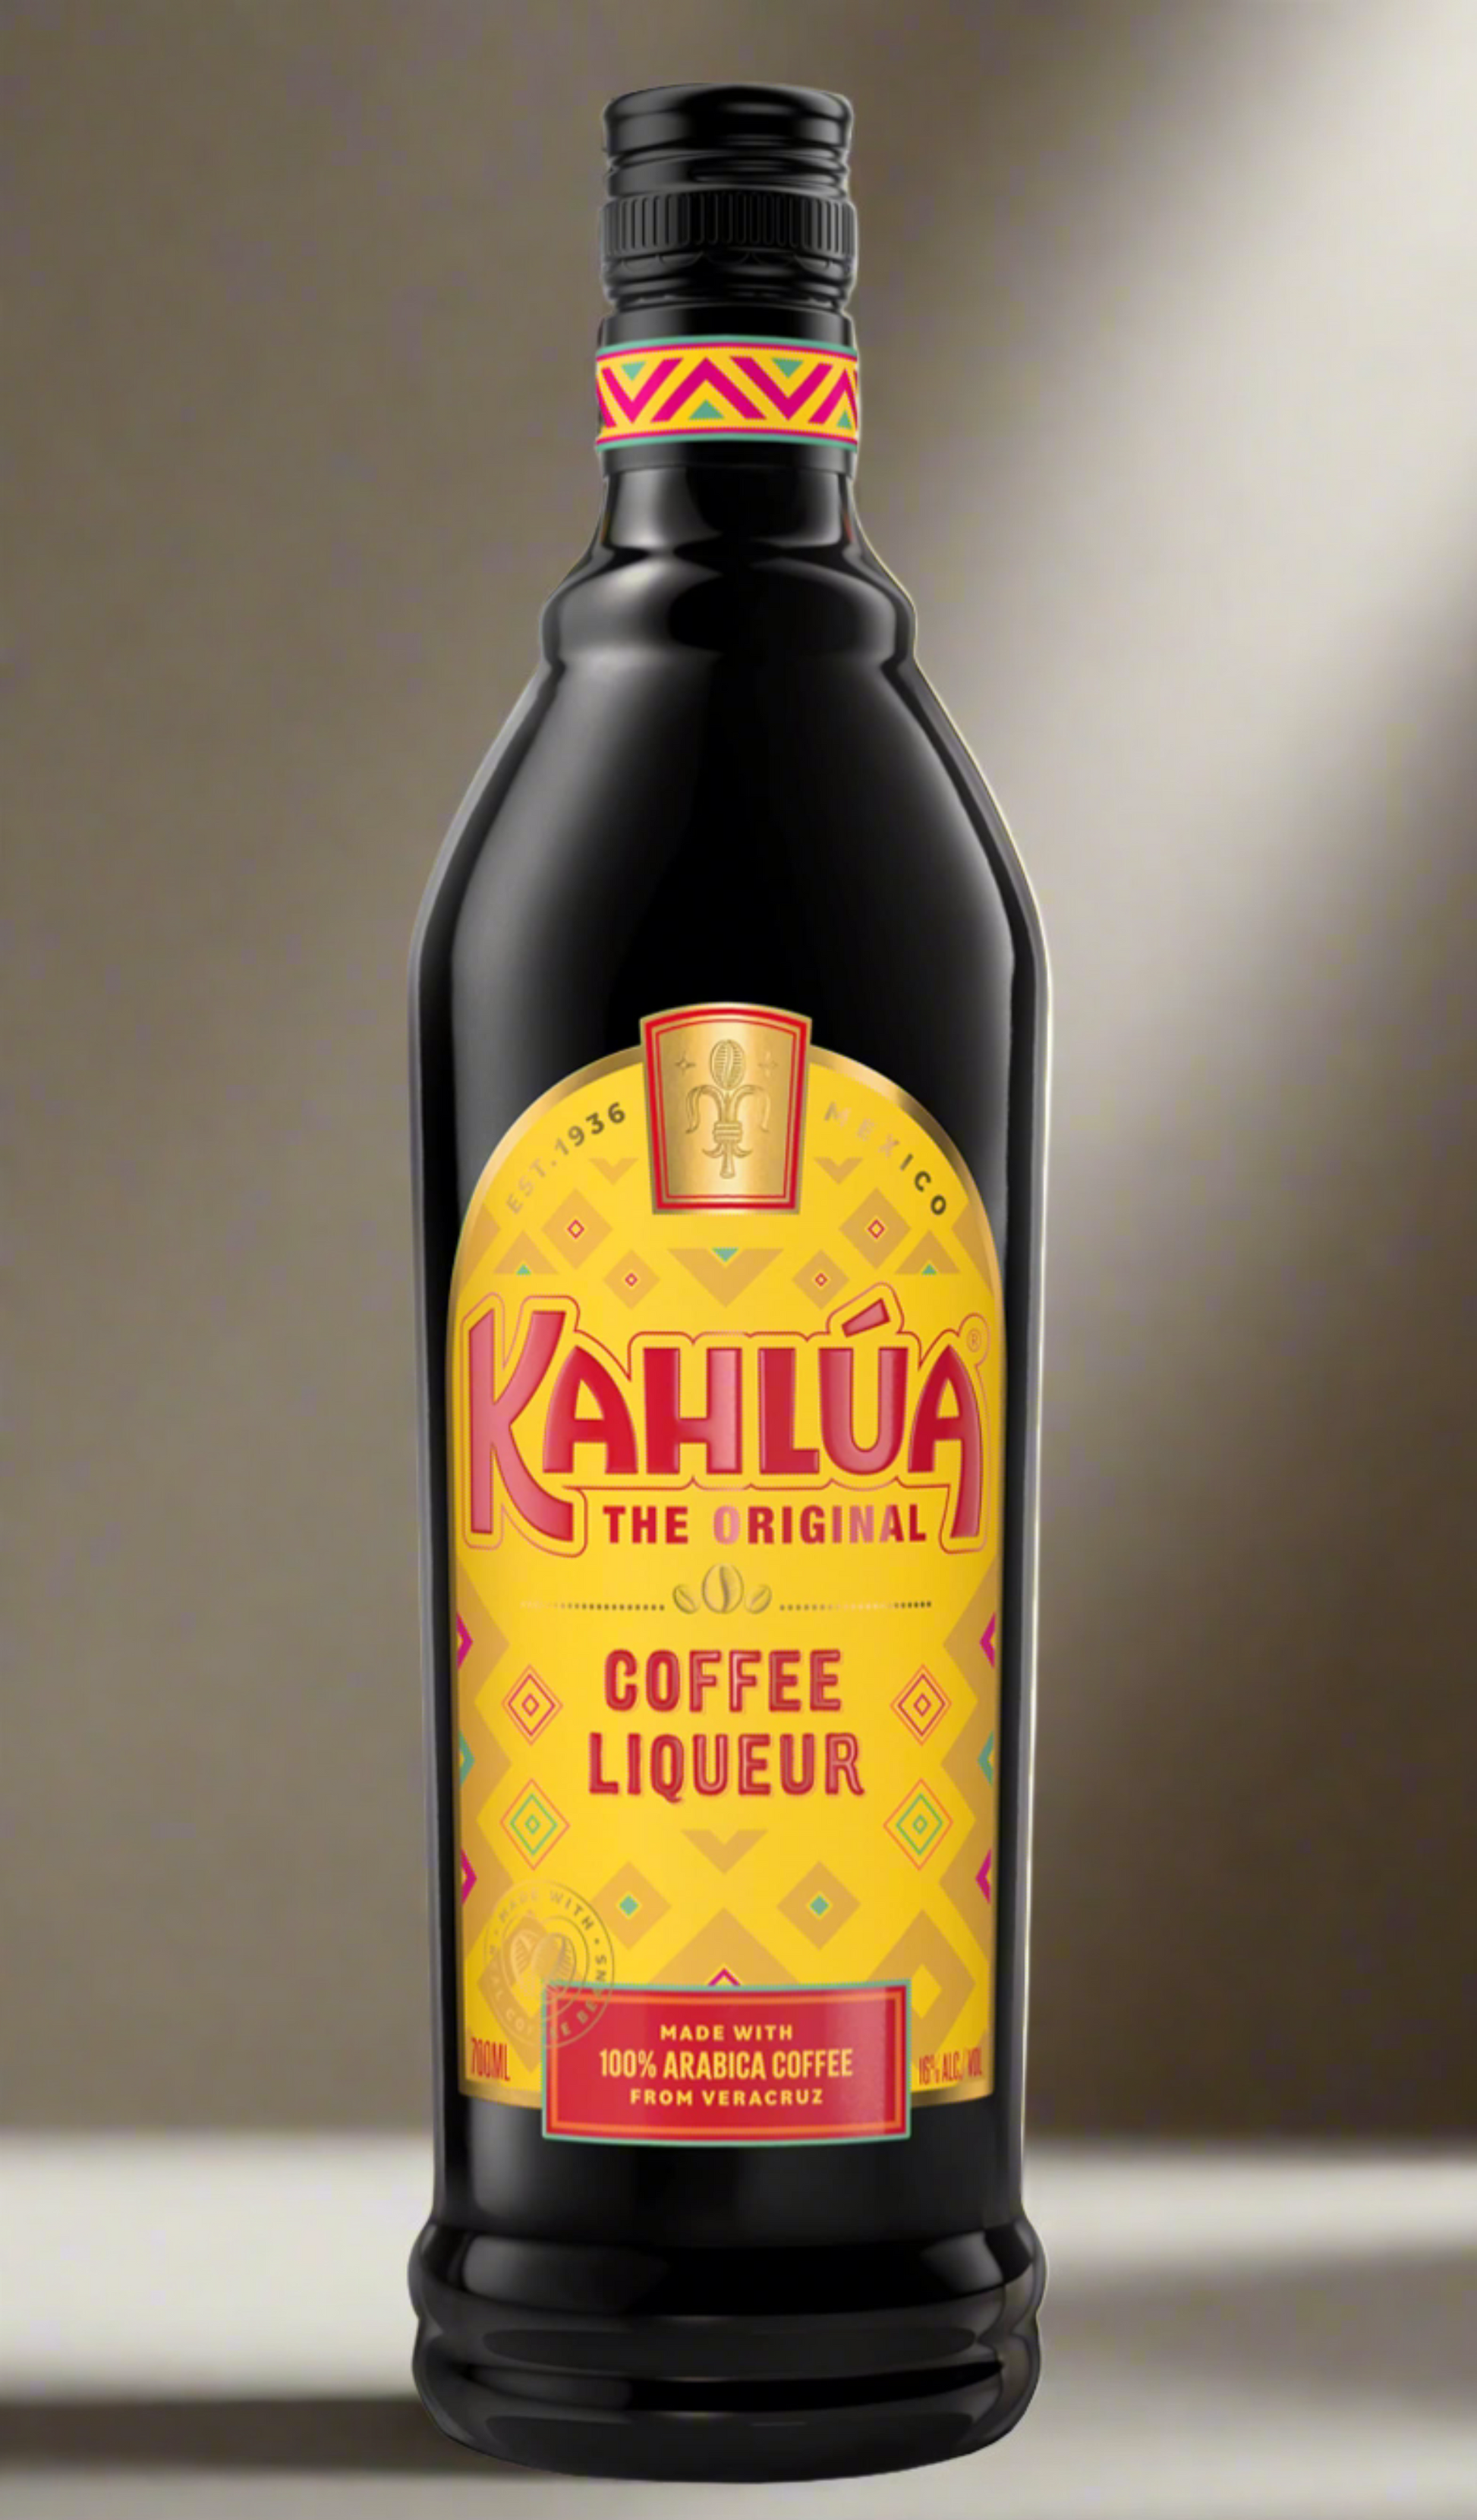 Find out more or buy Kahlua Original Coffee Liqueur 700ml online at Wine Sellers Direct - Australia’s independent liquor specialists.